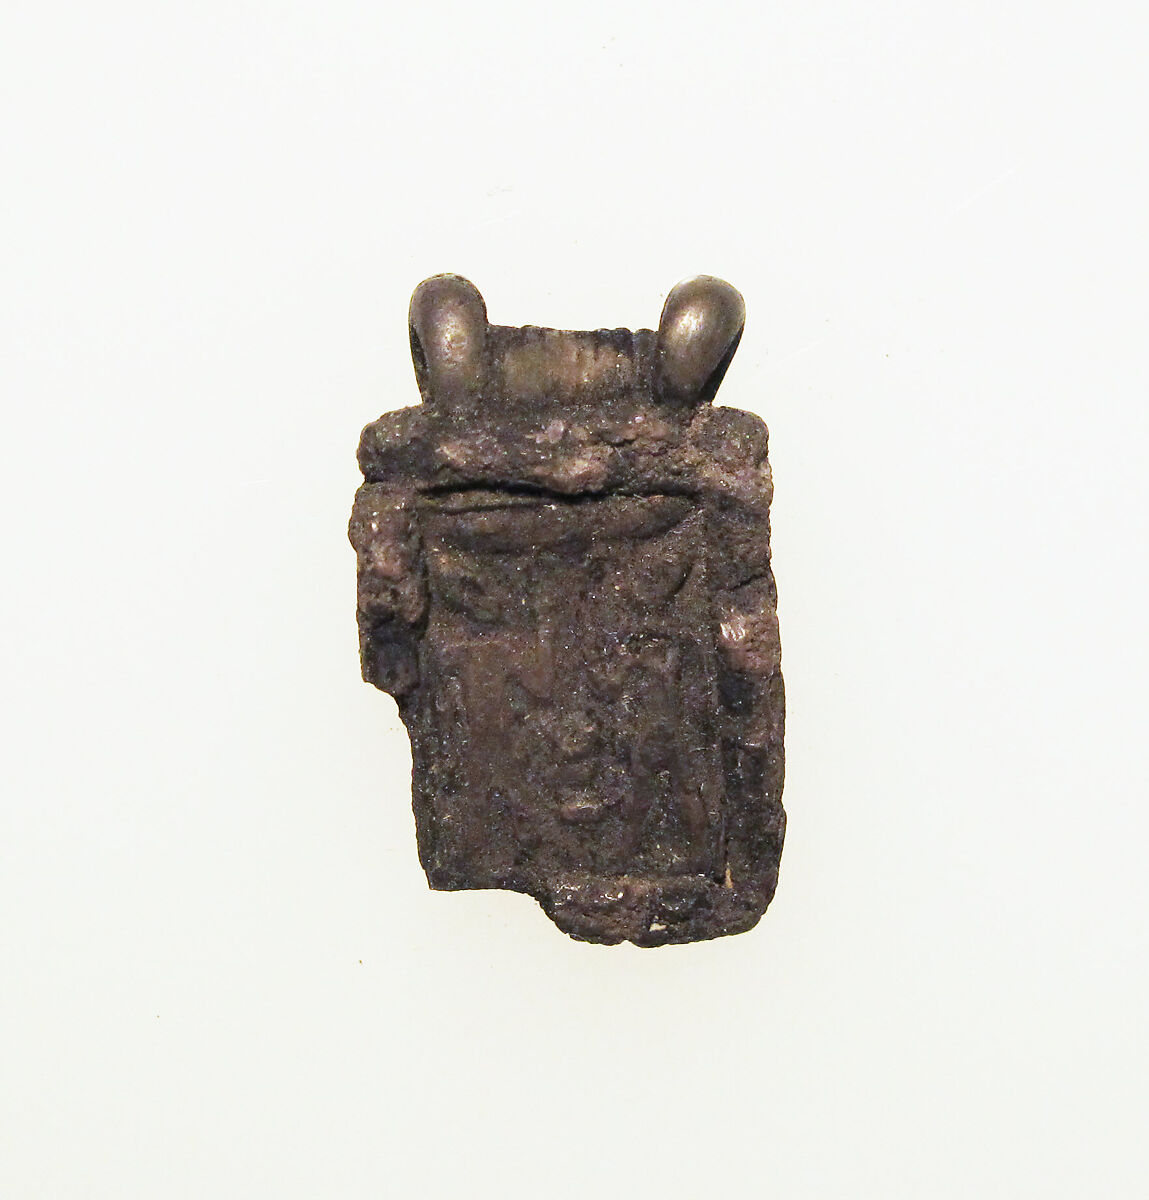 Pendant with figures, Silver, Cypriot 